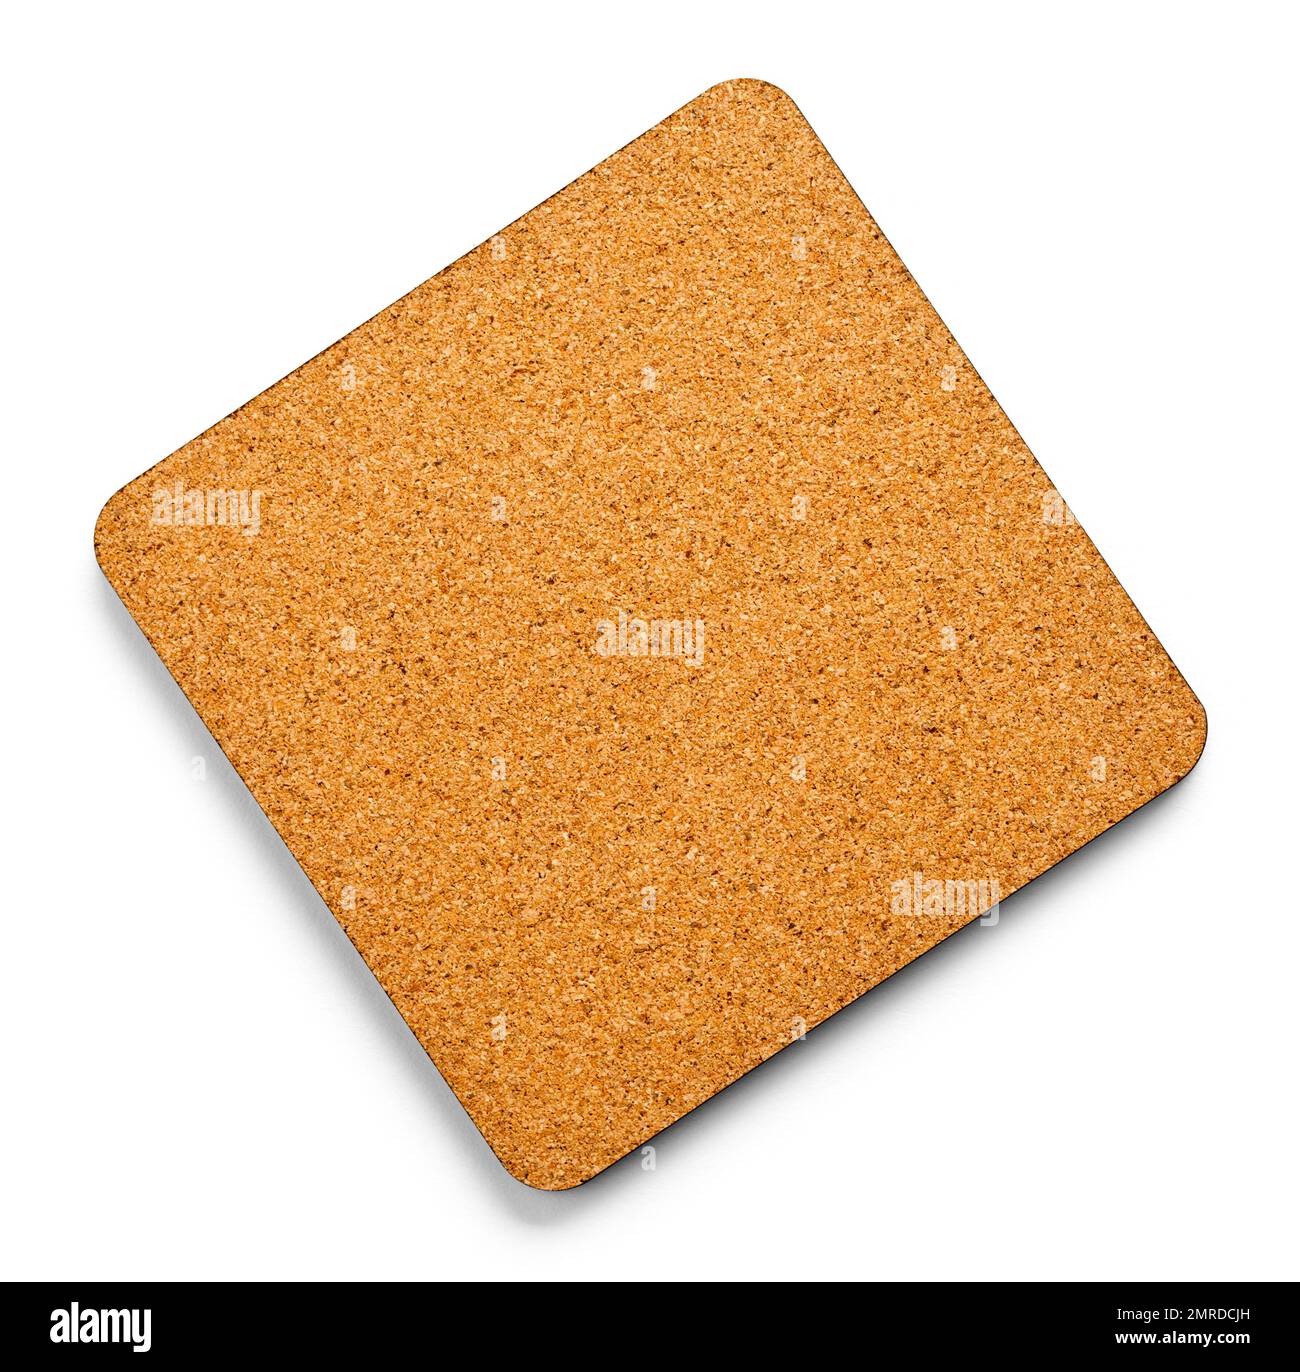 Square Cork Coaster Cut Out on White. Stock Photo